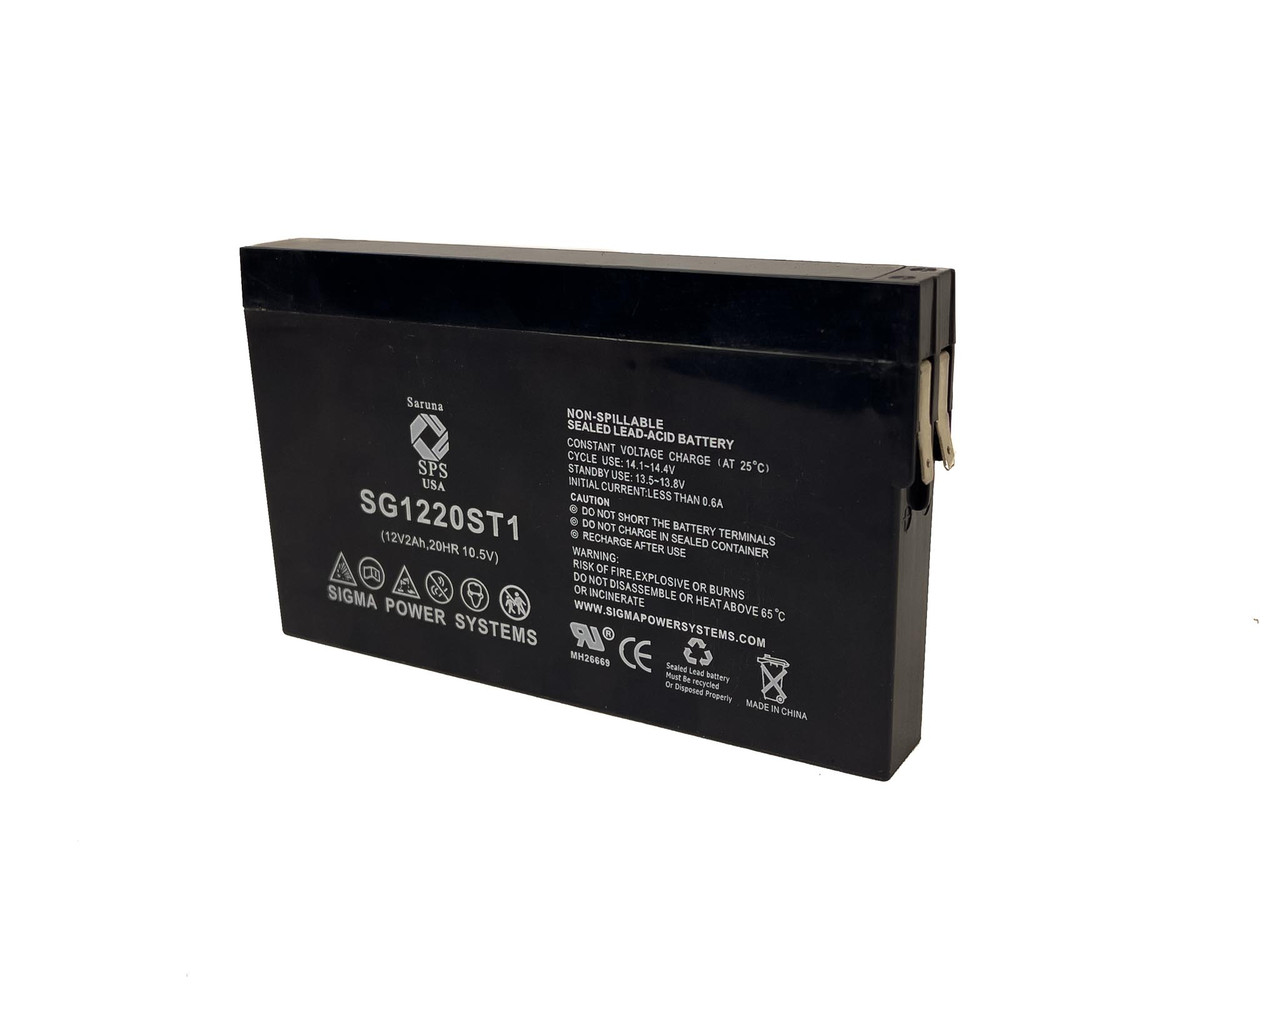 Raion Power 12V 2Ah Non-Spillable Replacement Rechargebale Battery for Litton ST541 Stats Scope